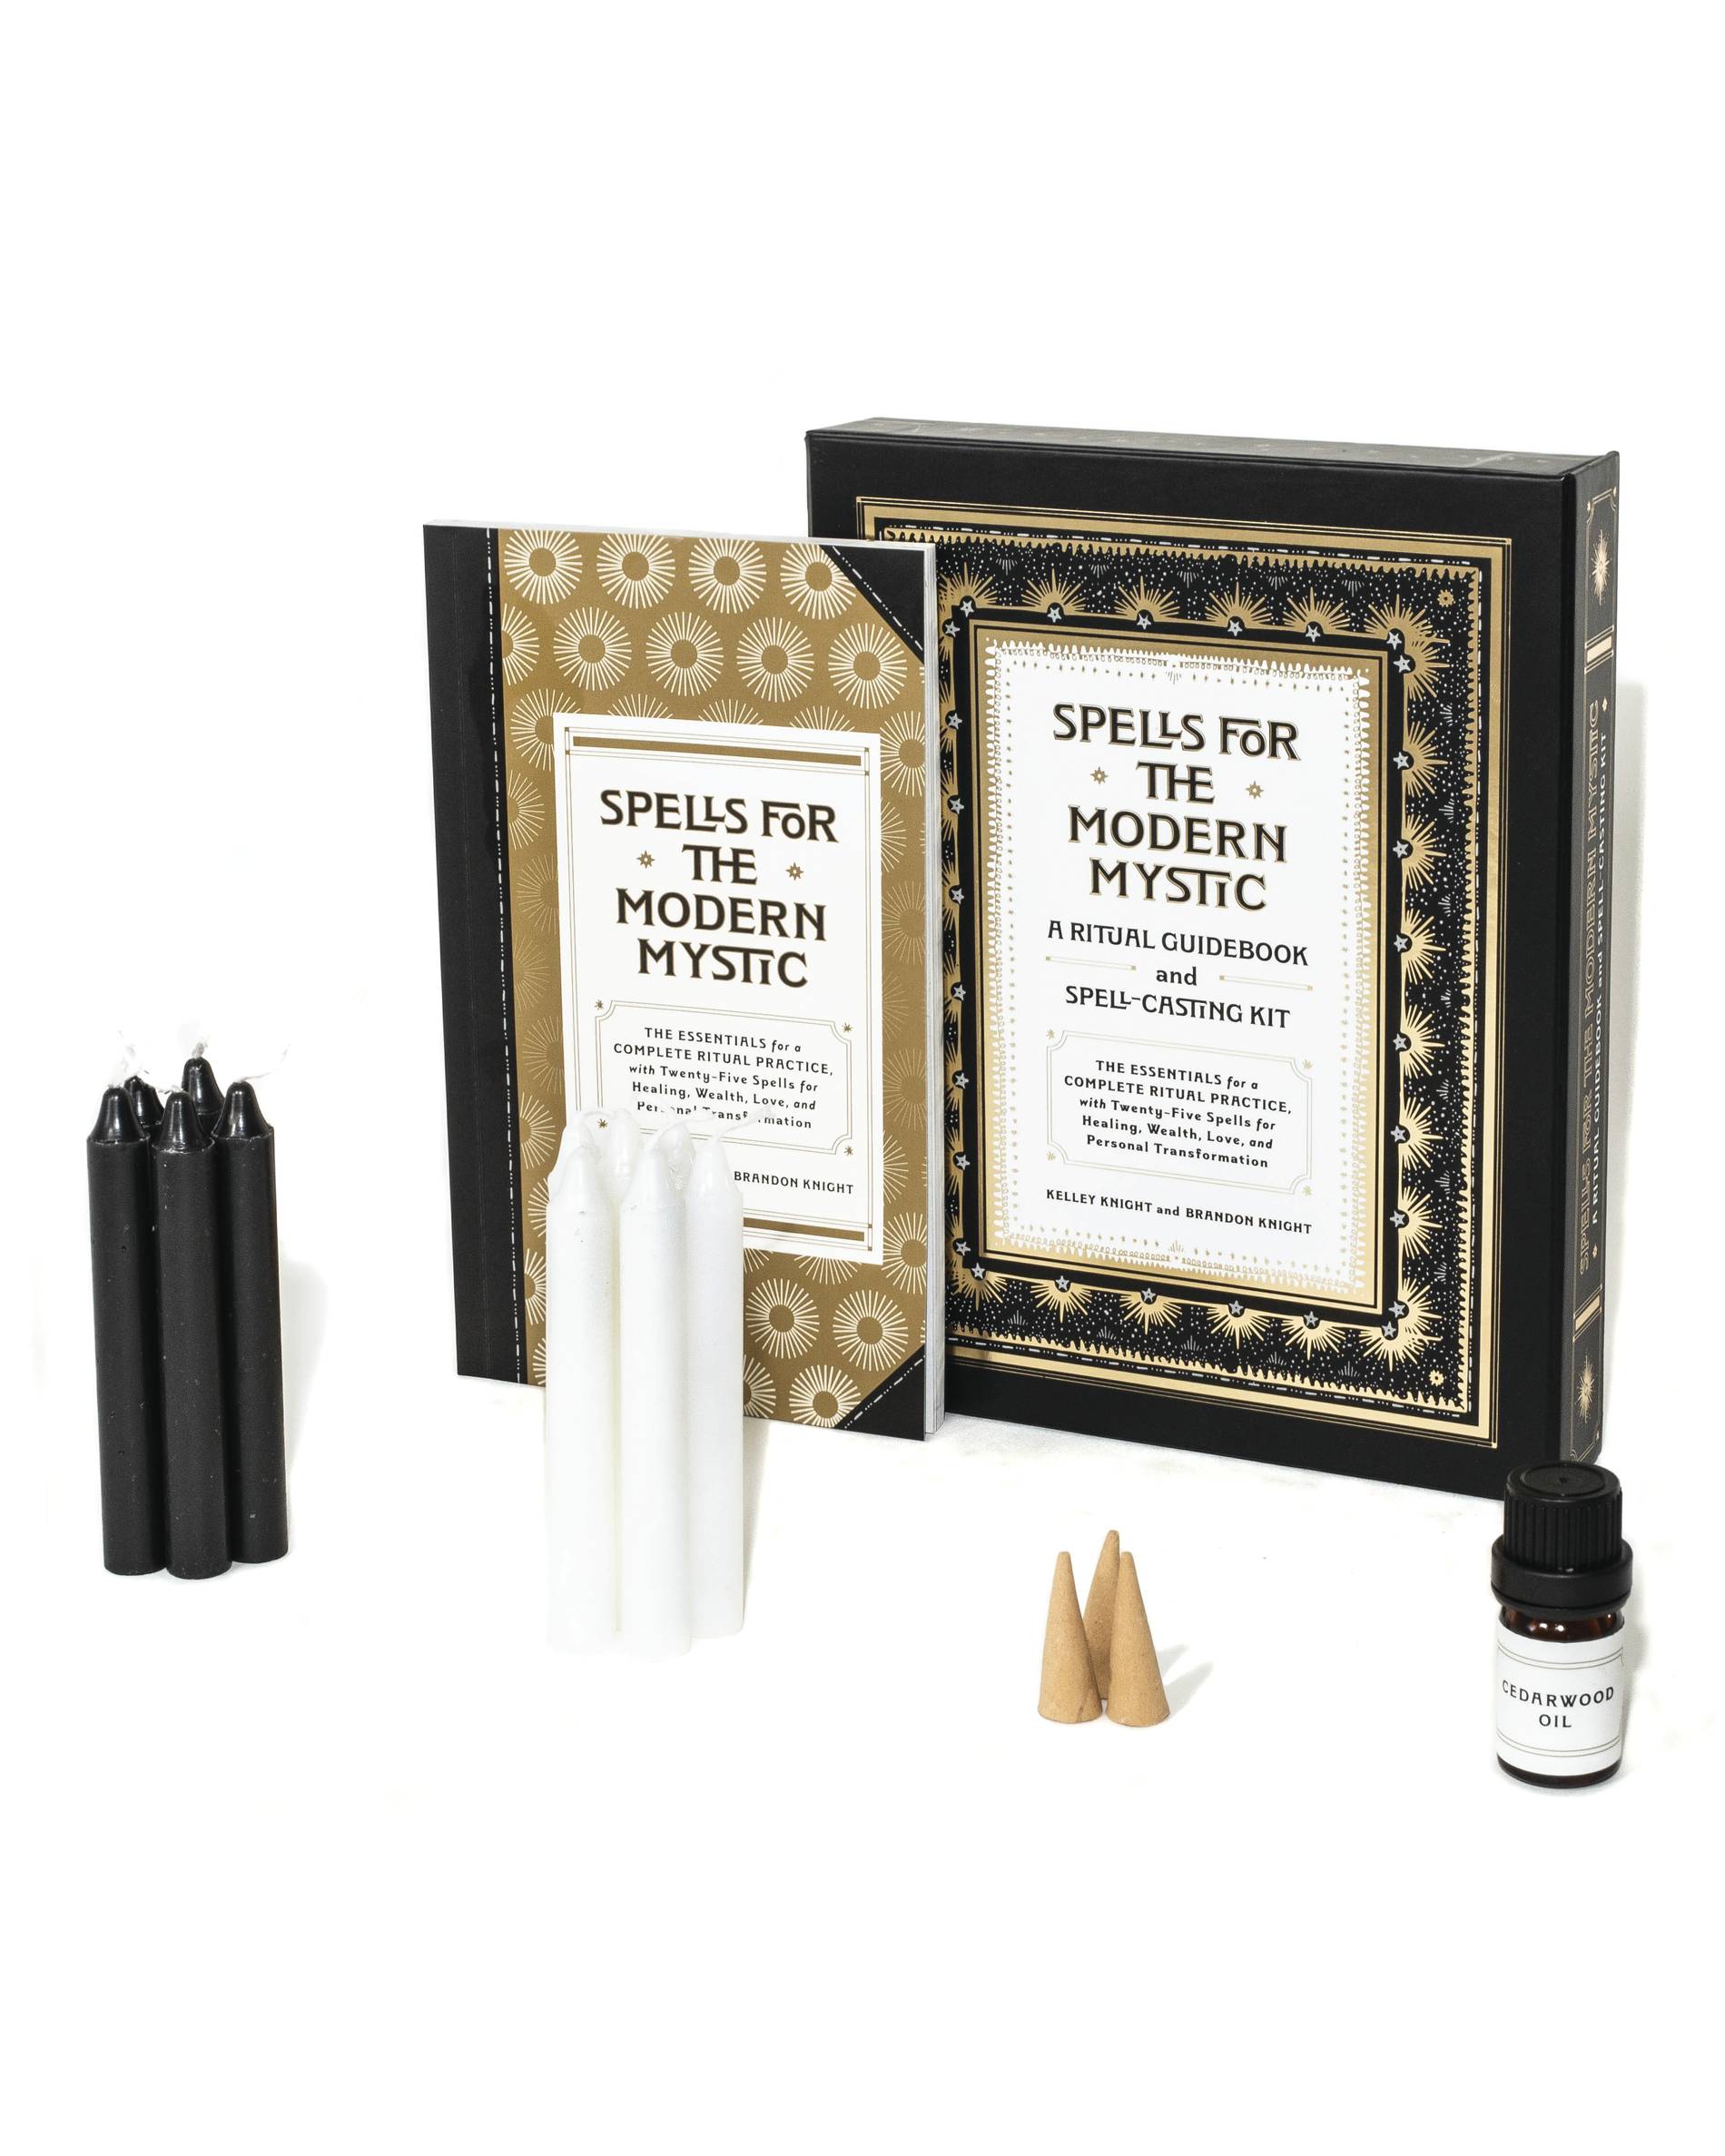 Spells_for_the_Modern_Mystic_A_Ritual_Guidebook_and_SpellCasting_Kit-0001.jpg